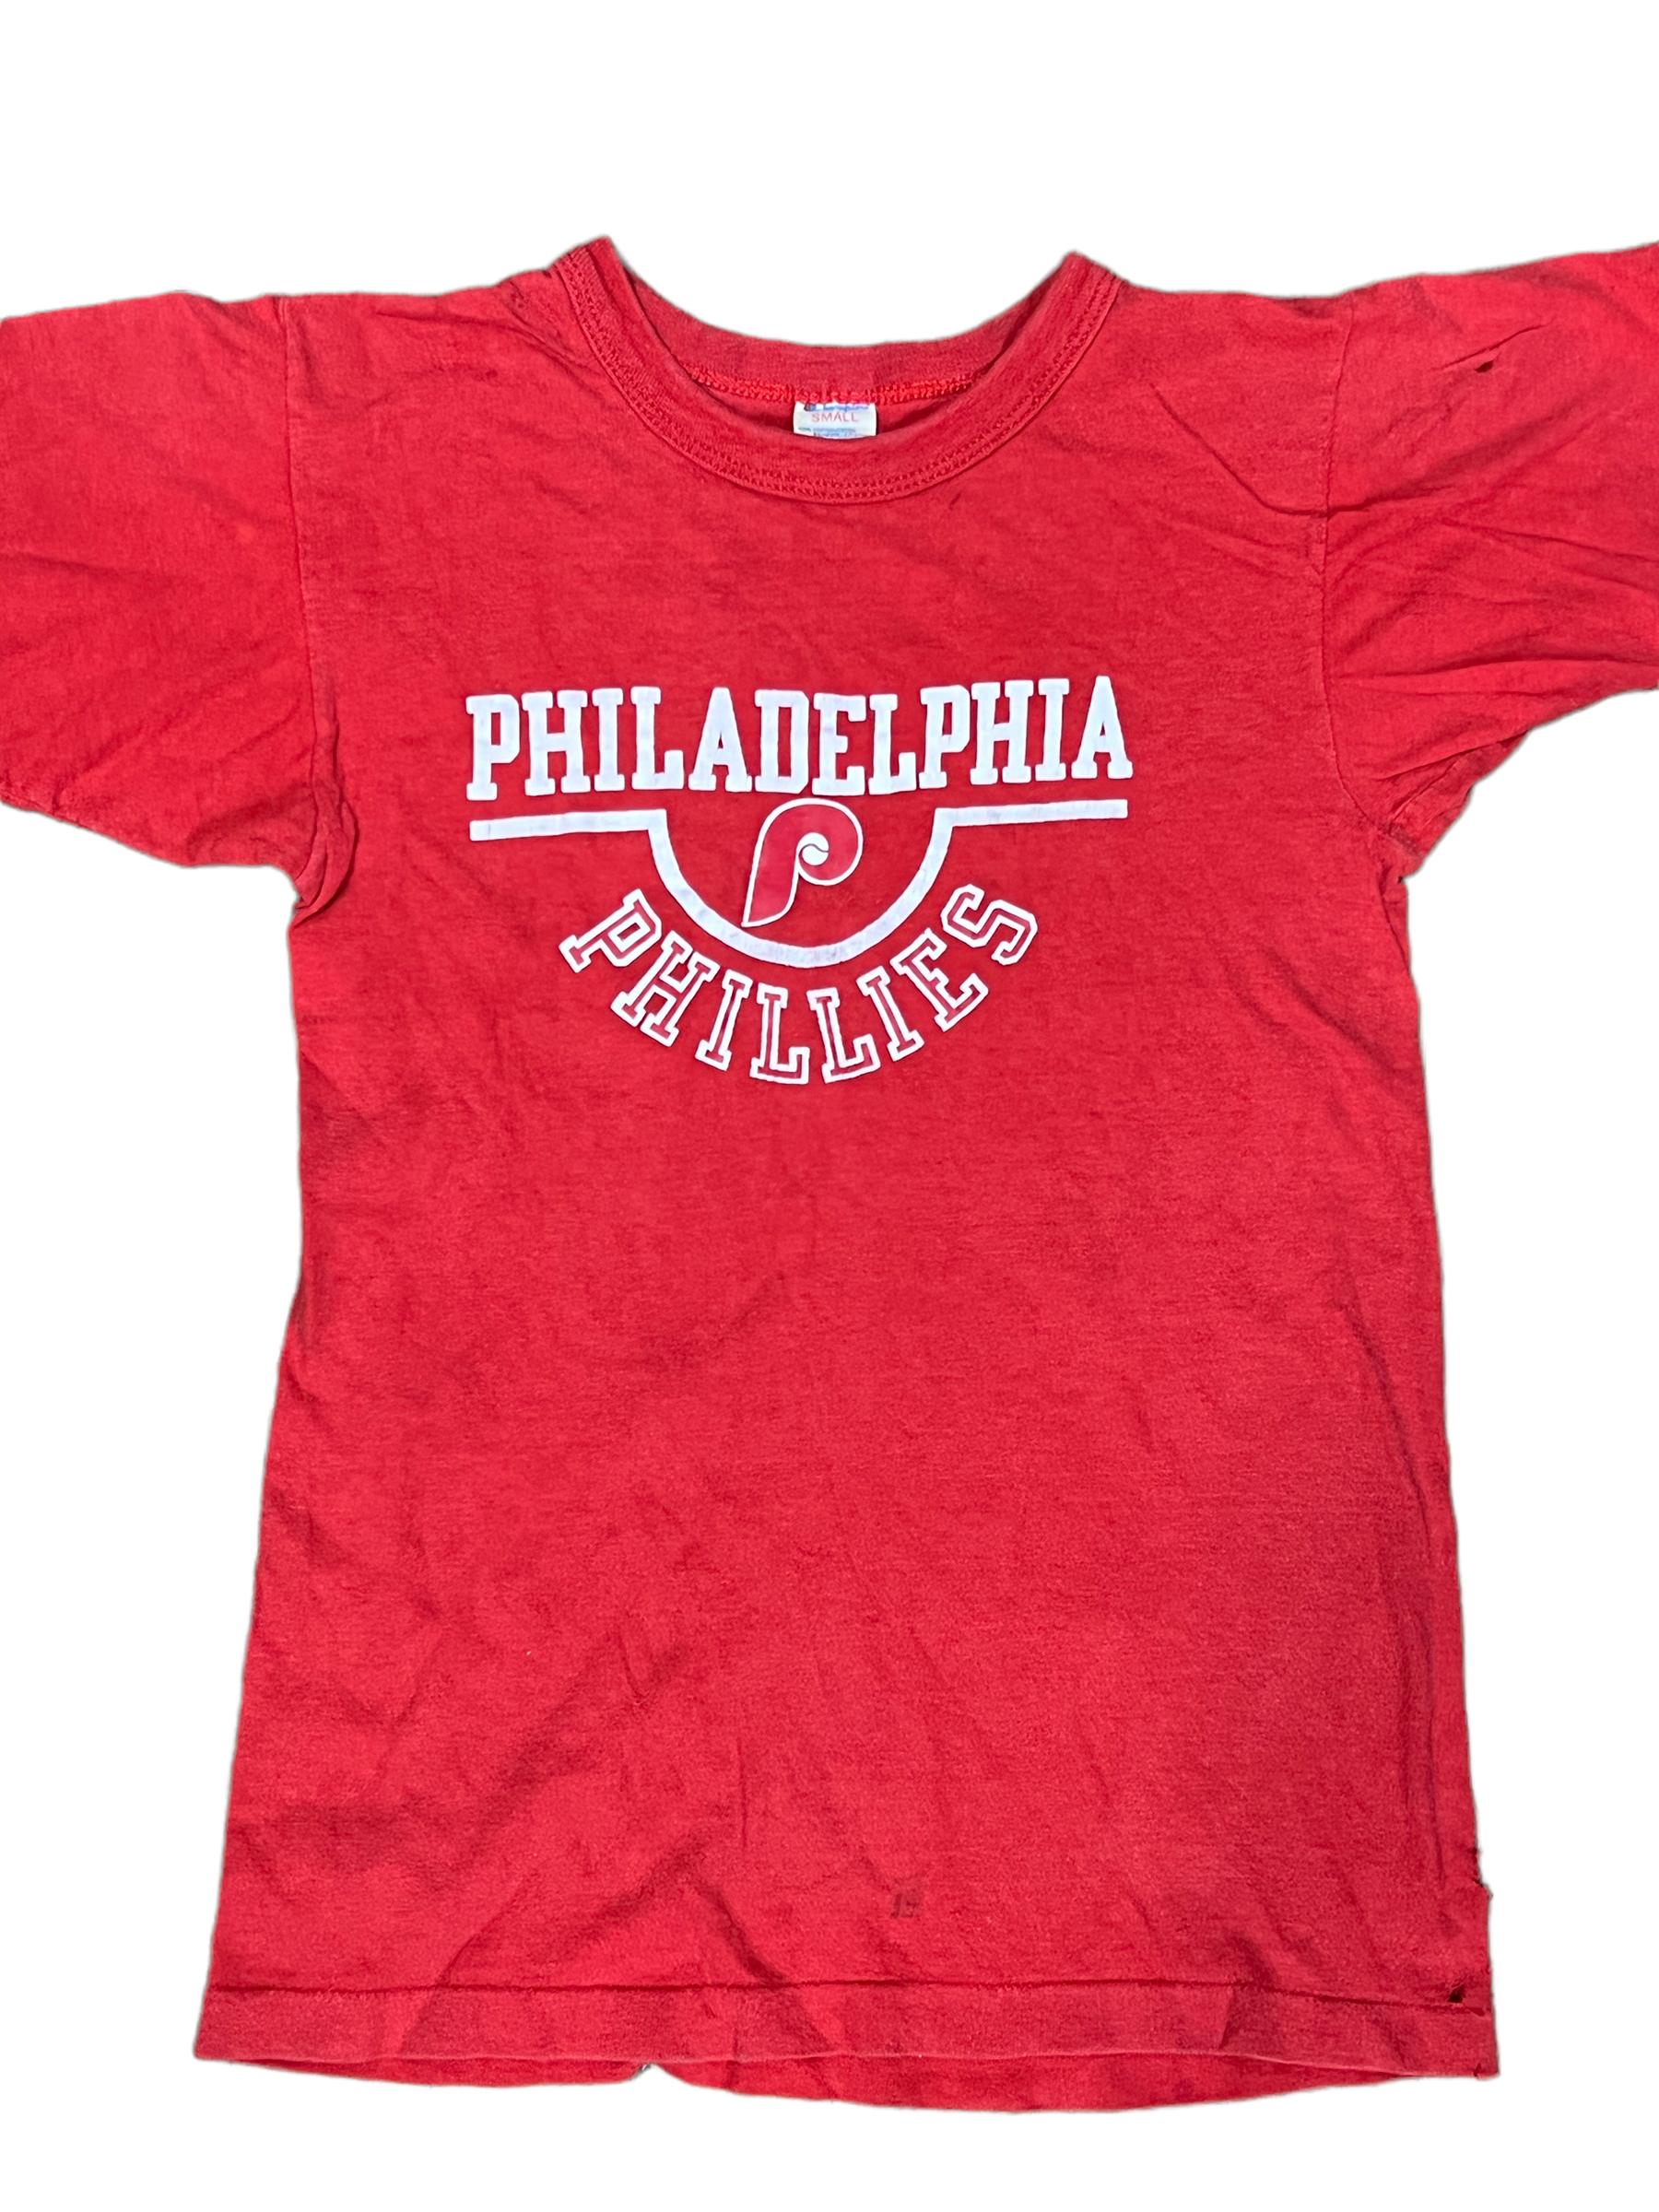 phillies shirt youth